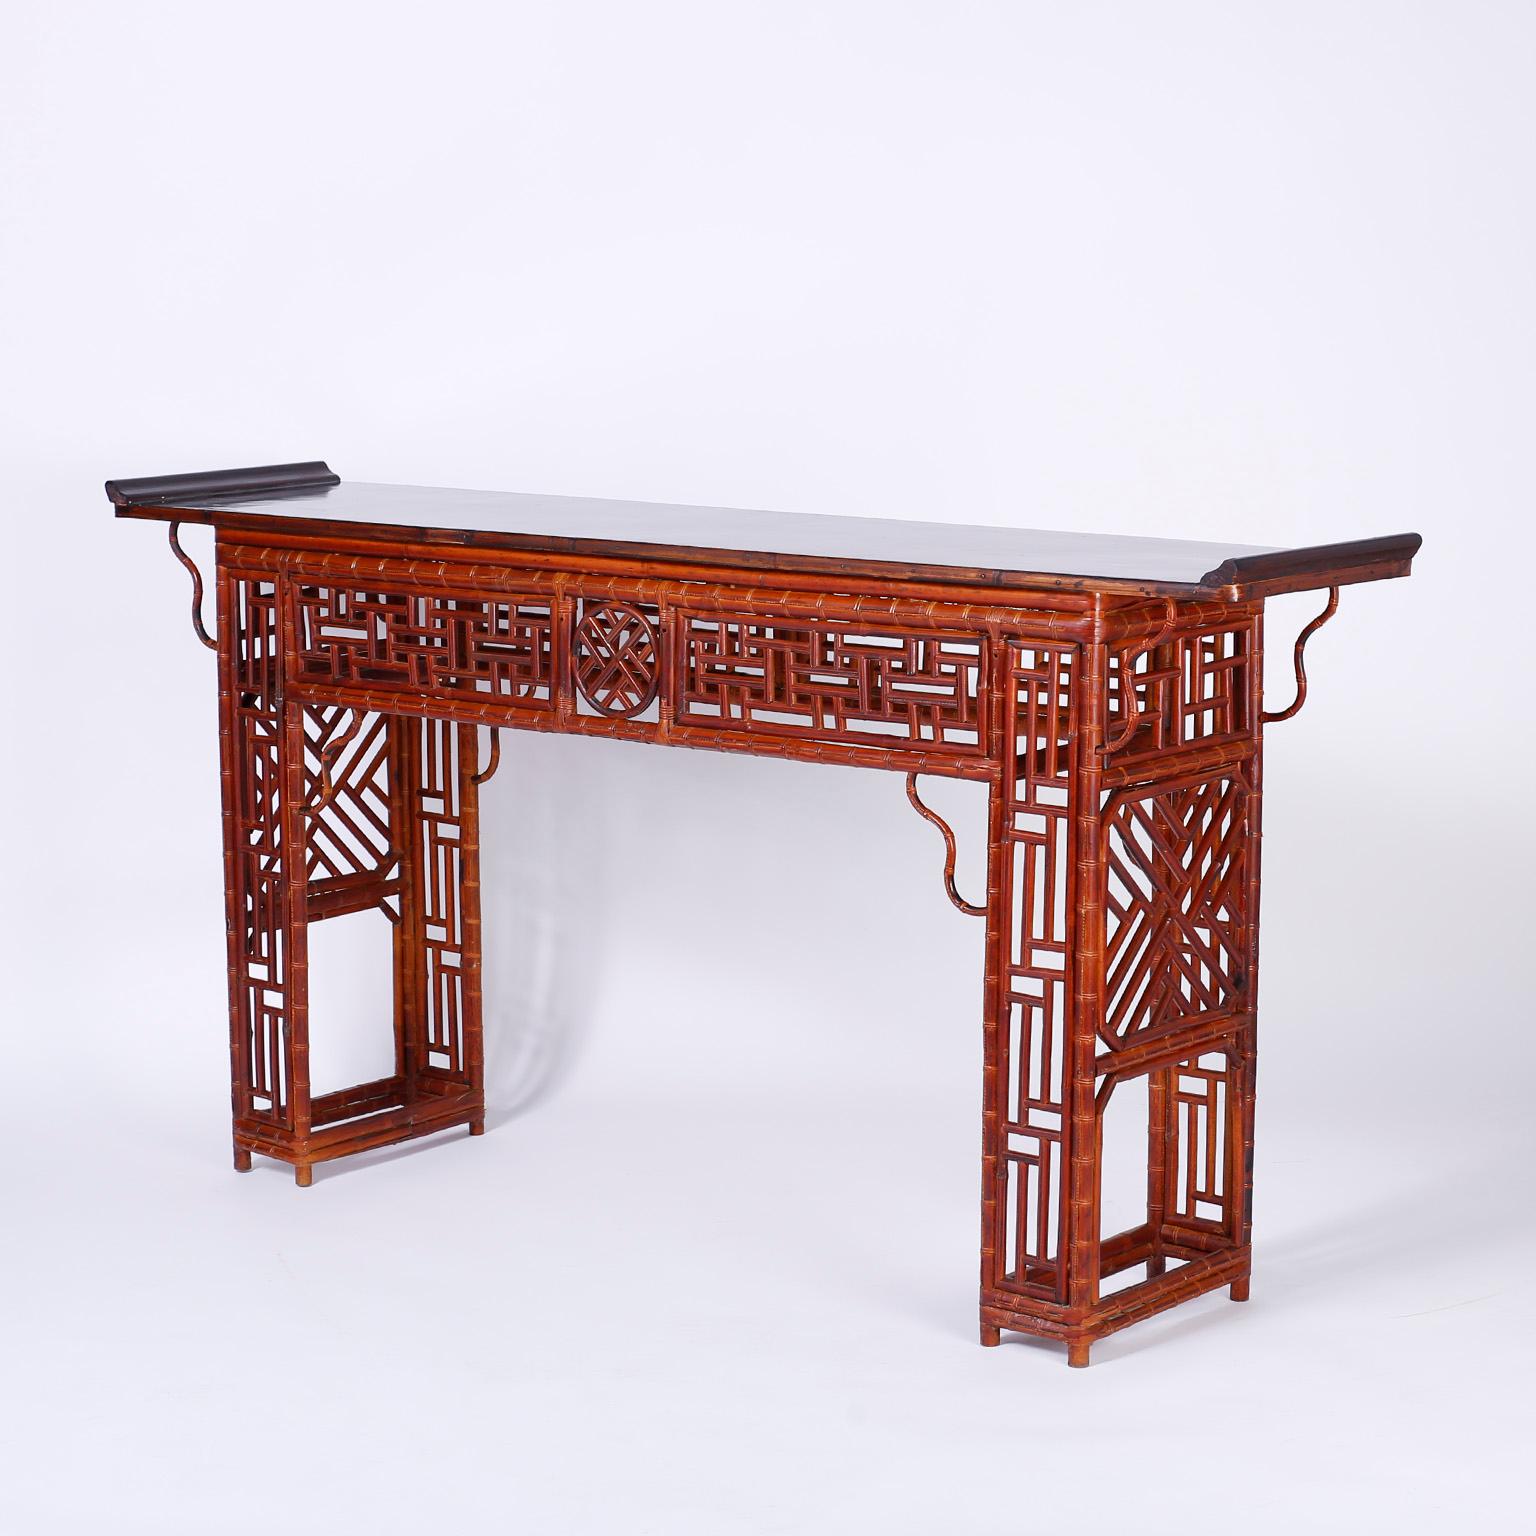 Refined Chinese Chippendale style console with a black lacquer top over a bamboo frame having Chippendale designs tastefully applied to the entire composition including a center medallion, brackets, and eight decorated legs.